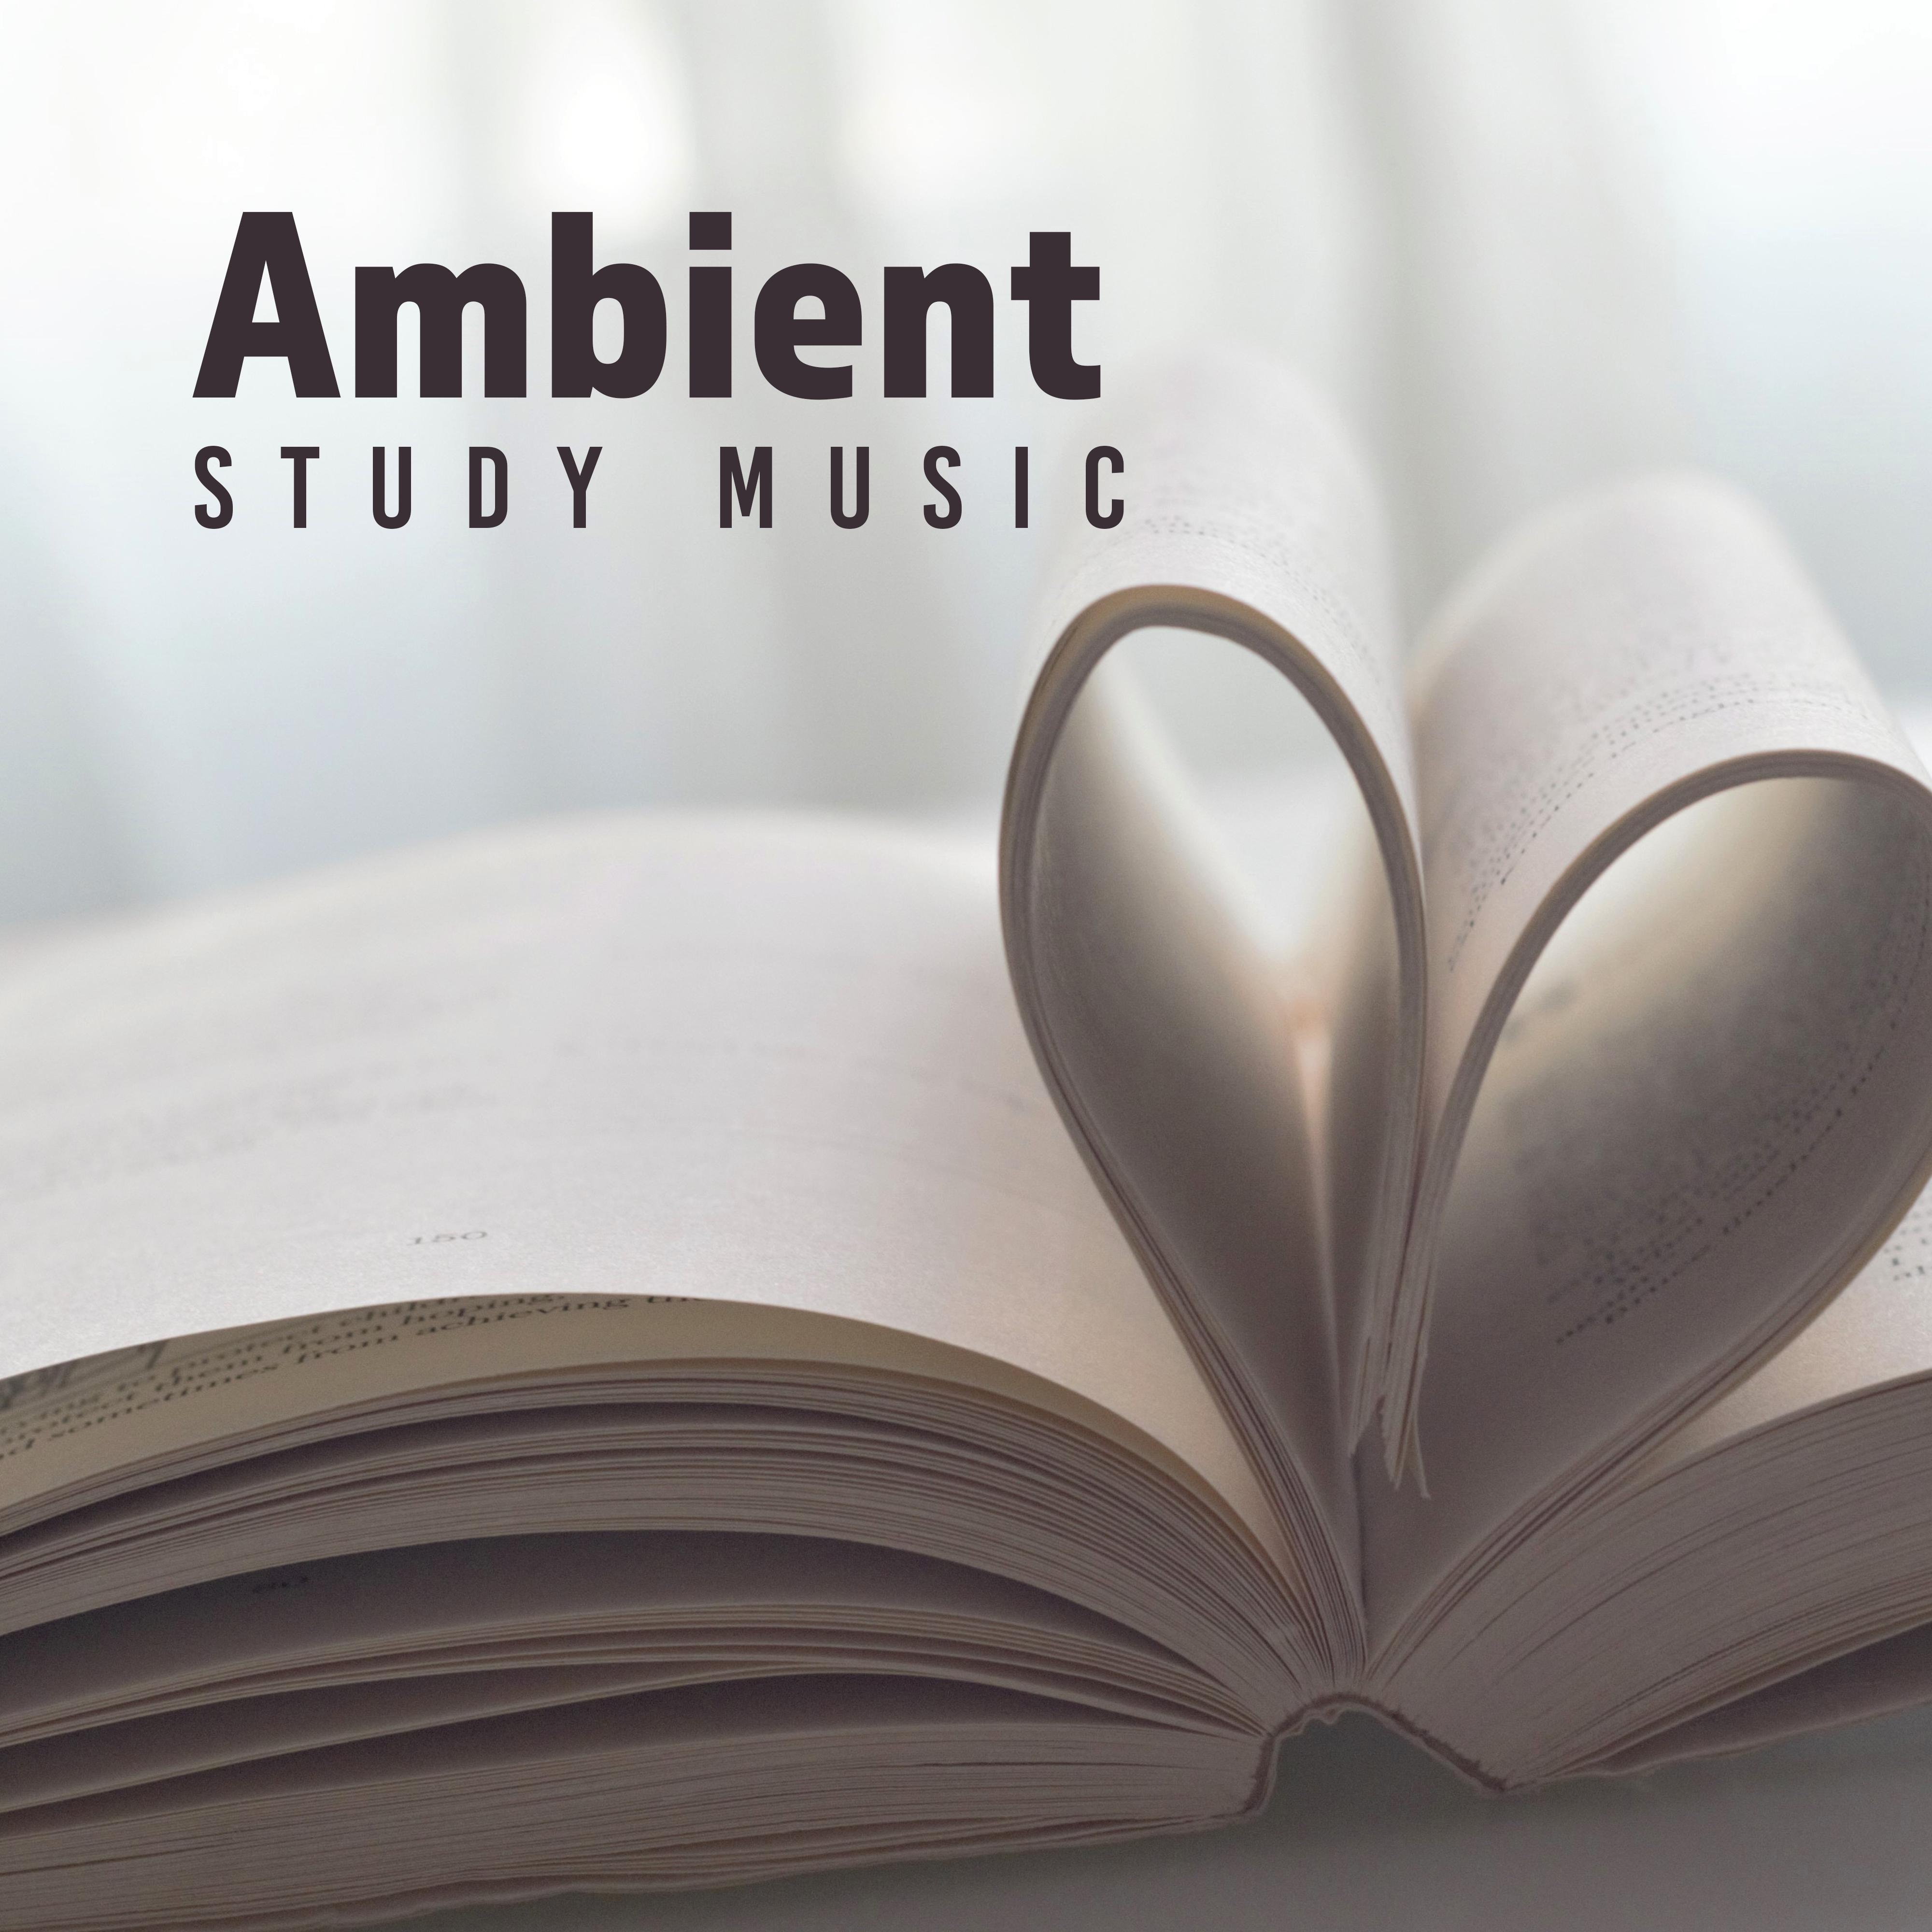 Ambient Study Music - Music Accelerating the Process of Remembering and Learning, Facilitating Focus and Concentration, Perfect for Studying and During Intensive Mental Effort